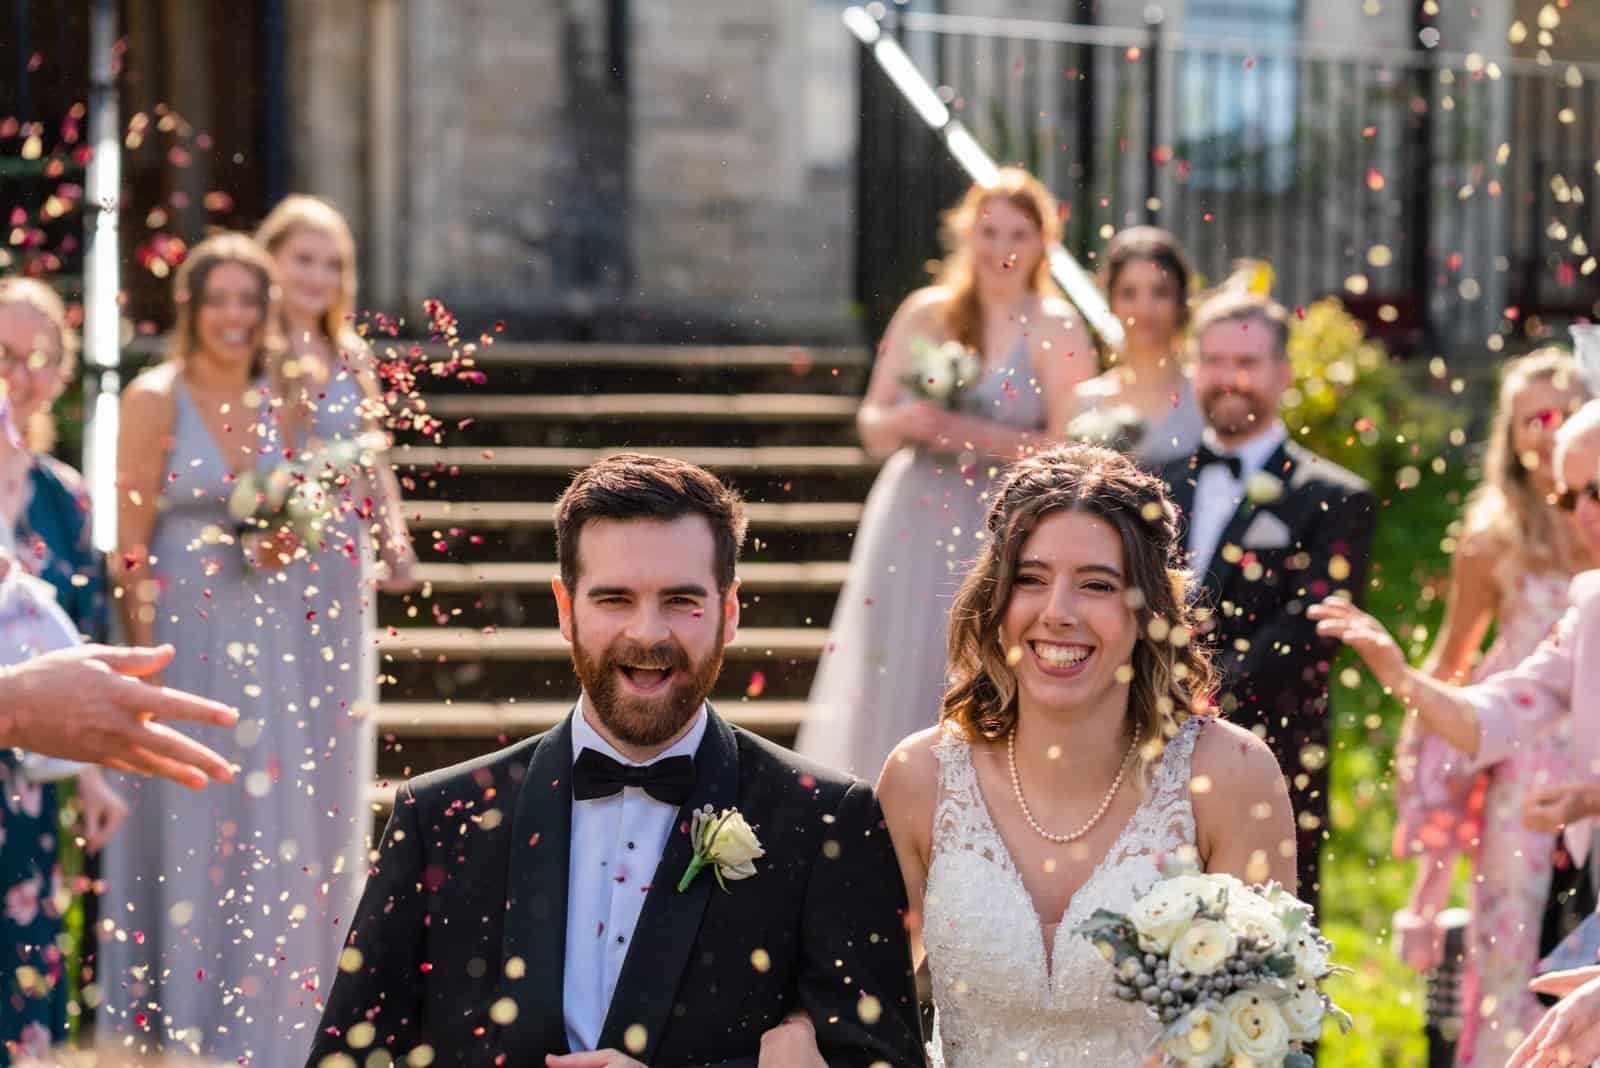 Bride and groom being showered in confetti at their wedding.